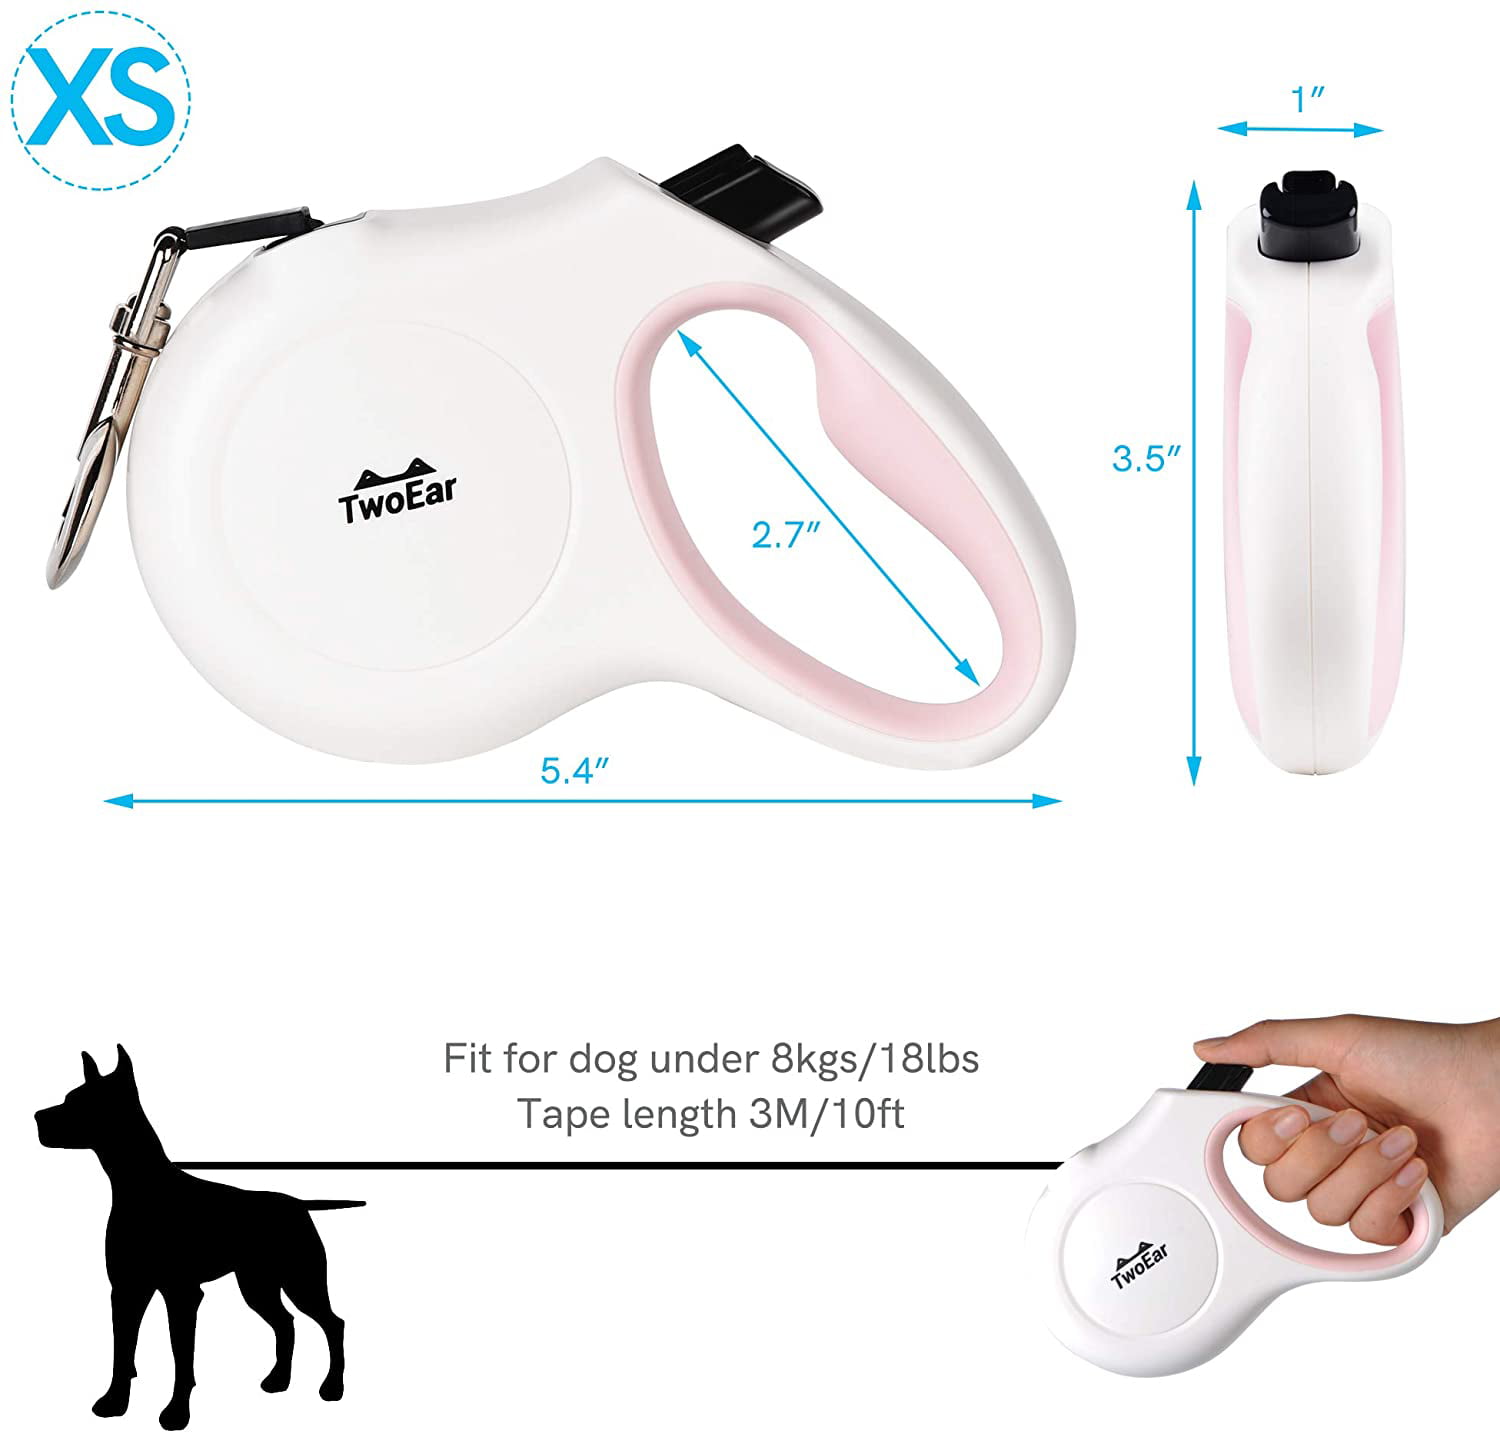 Strong Reflective Nylon Tape with Anti-Slip Handle Tangle-Free 10 ft Heavy Duty Long Pet Walking Leashes for X-Small/Small/Medium/Large Breed up to 18 lbs XS, White TwoEar Retractable Dog Leash